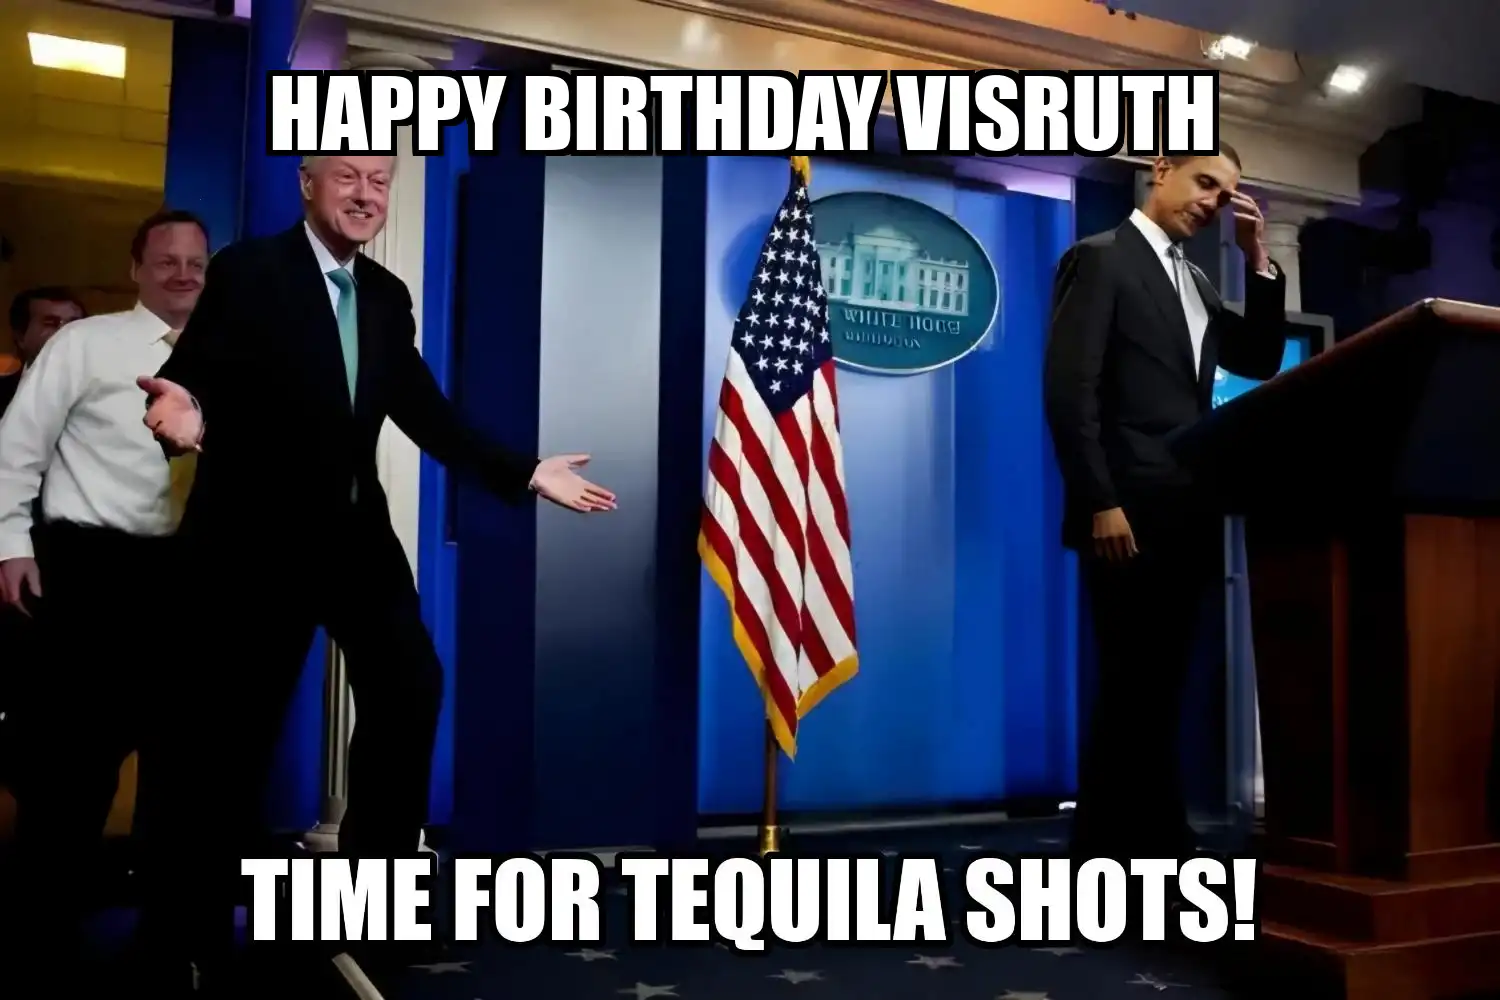 Happy Birthday Visruth Time For Tequila Shots Memes